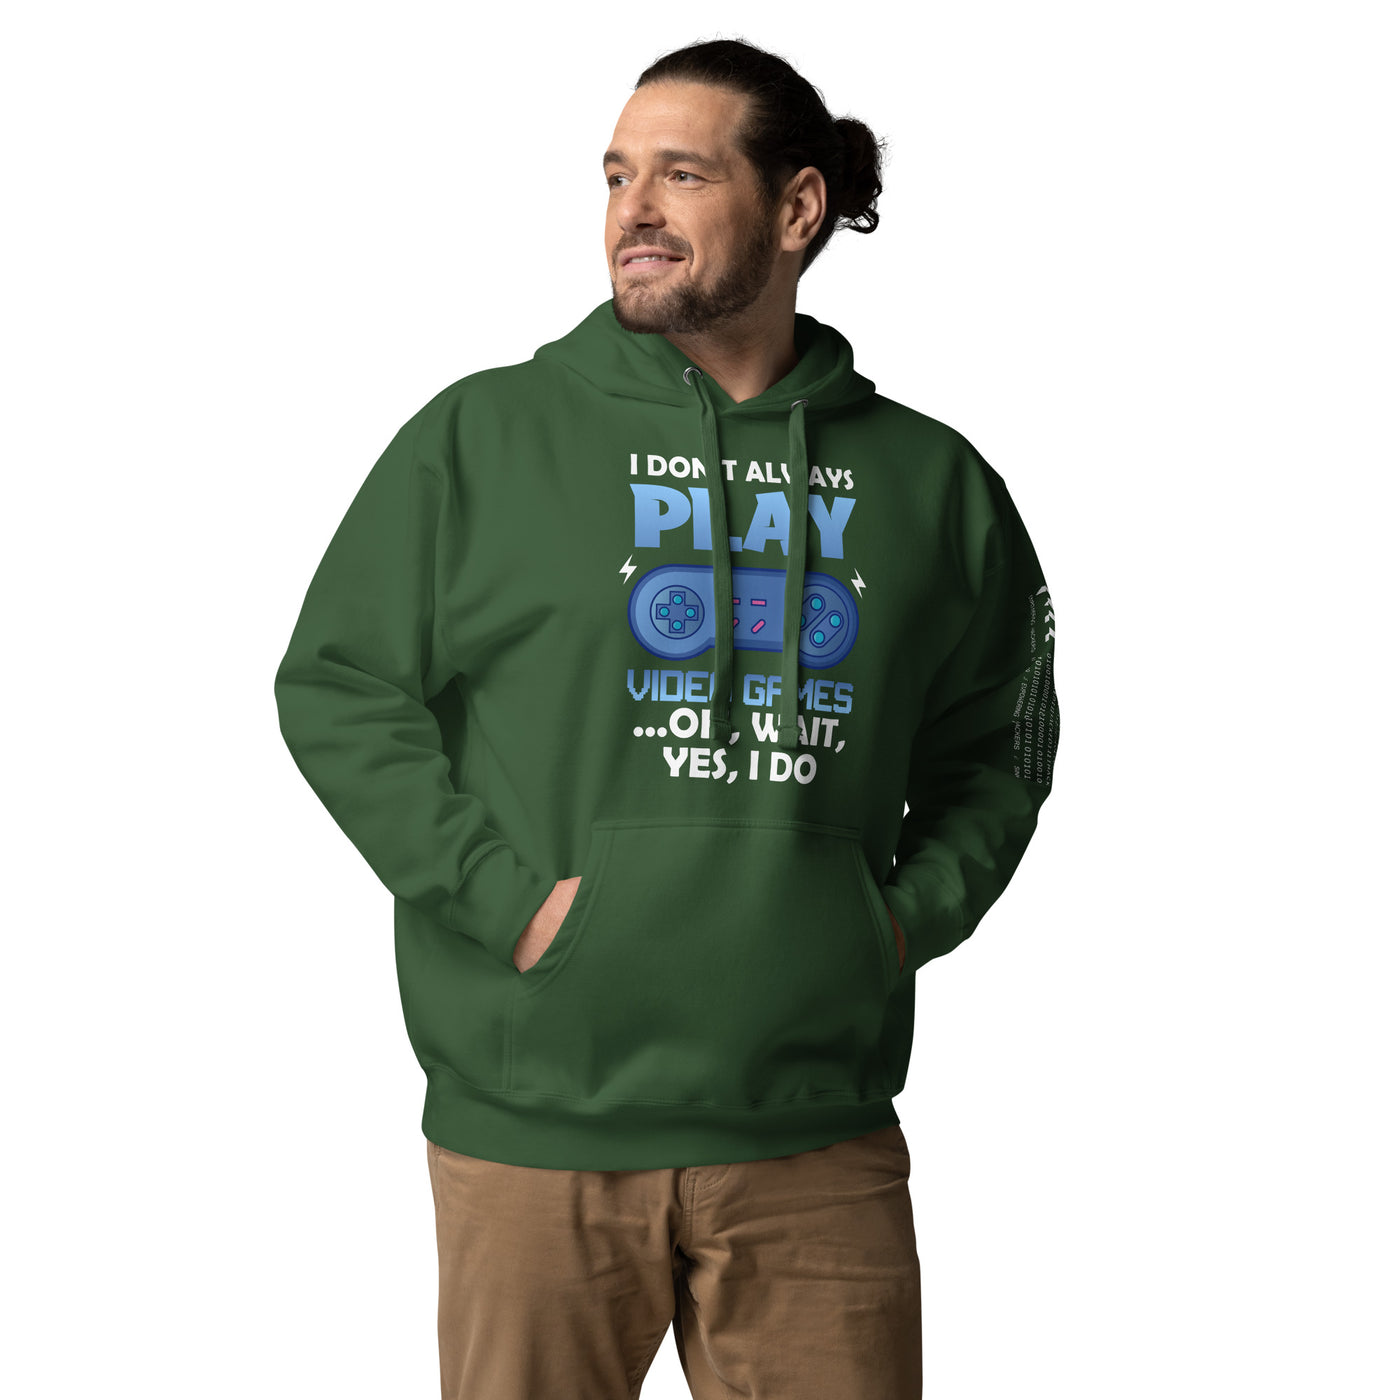 I don't always Play Video Game; Oh, Wait! Yes, I do - Unisex Hoodie